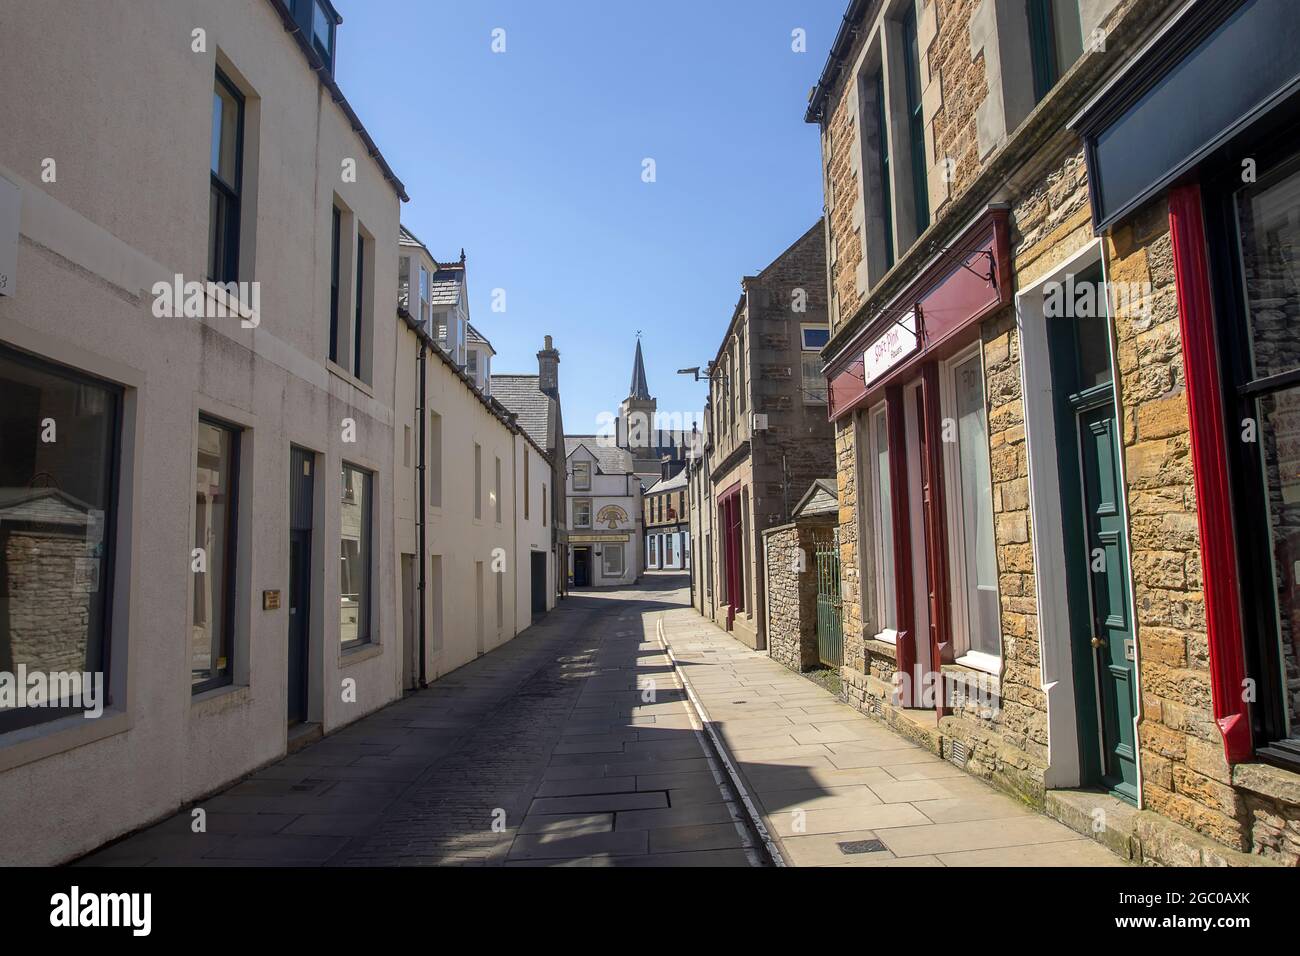 Buildings in the town of Stromness in Orkney, Scotland, UK Stock Photo